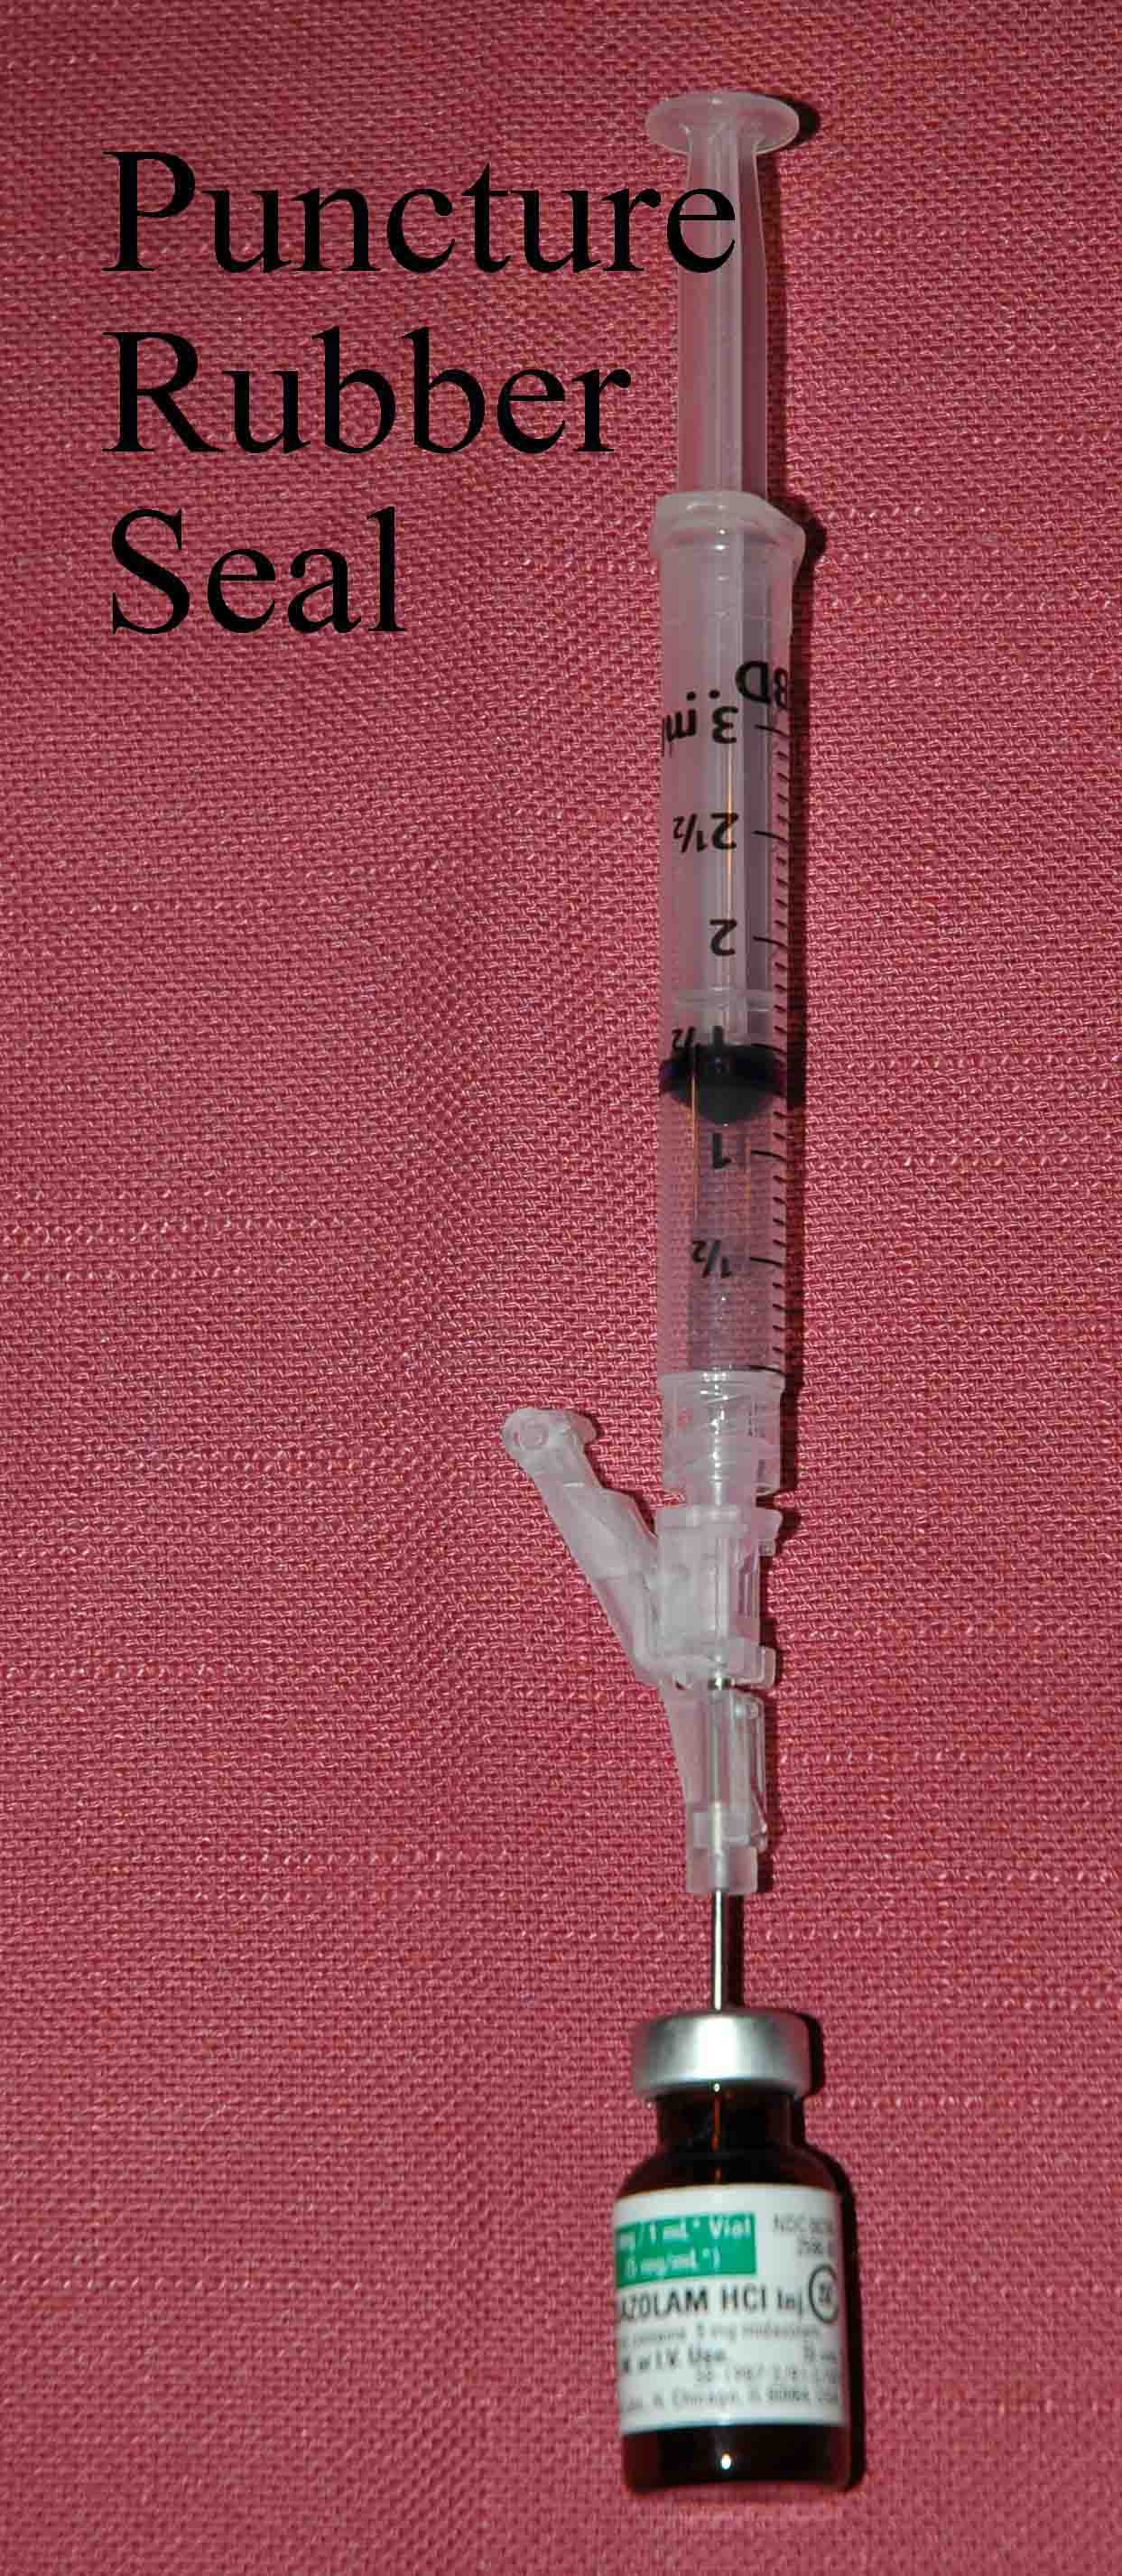 Puncture vial rubber seal with needle on syringe